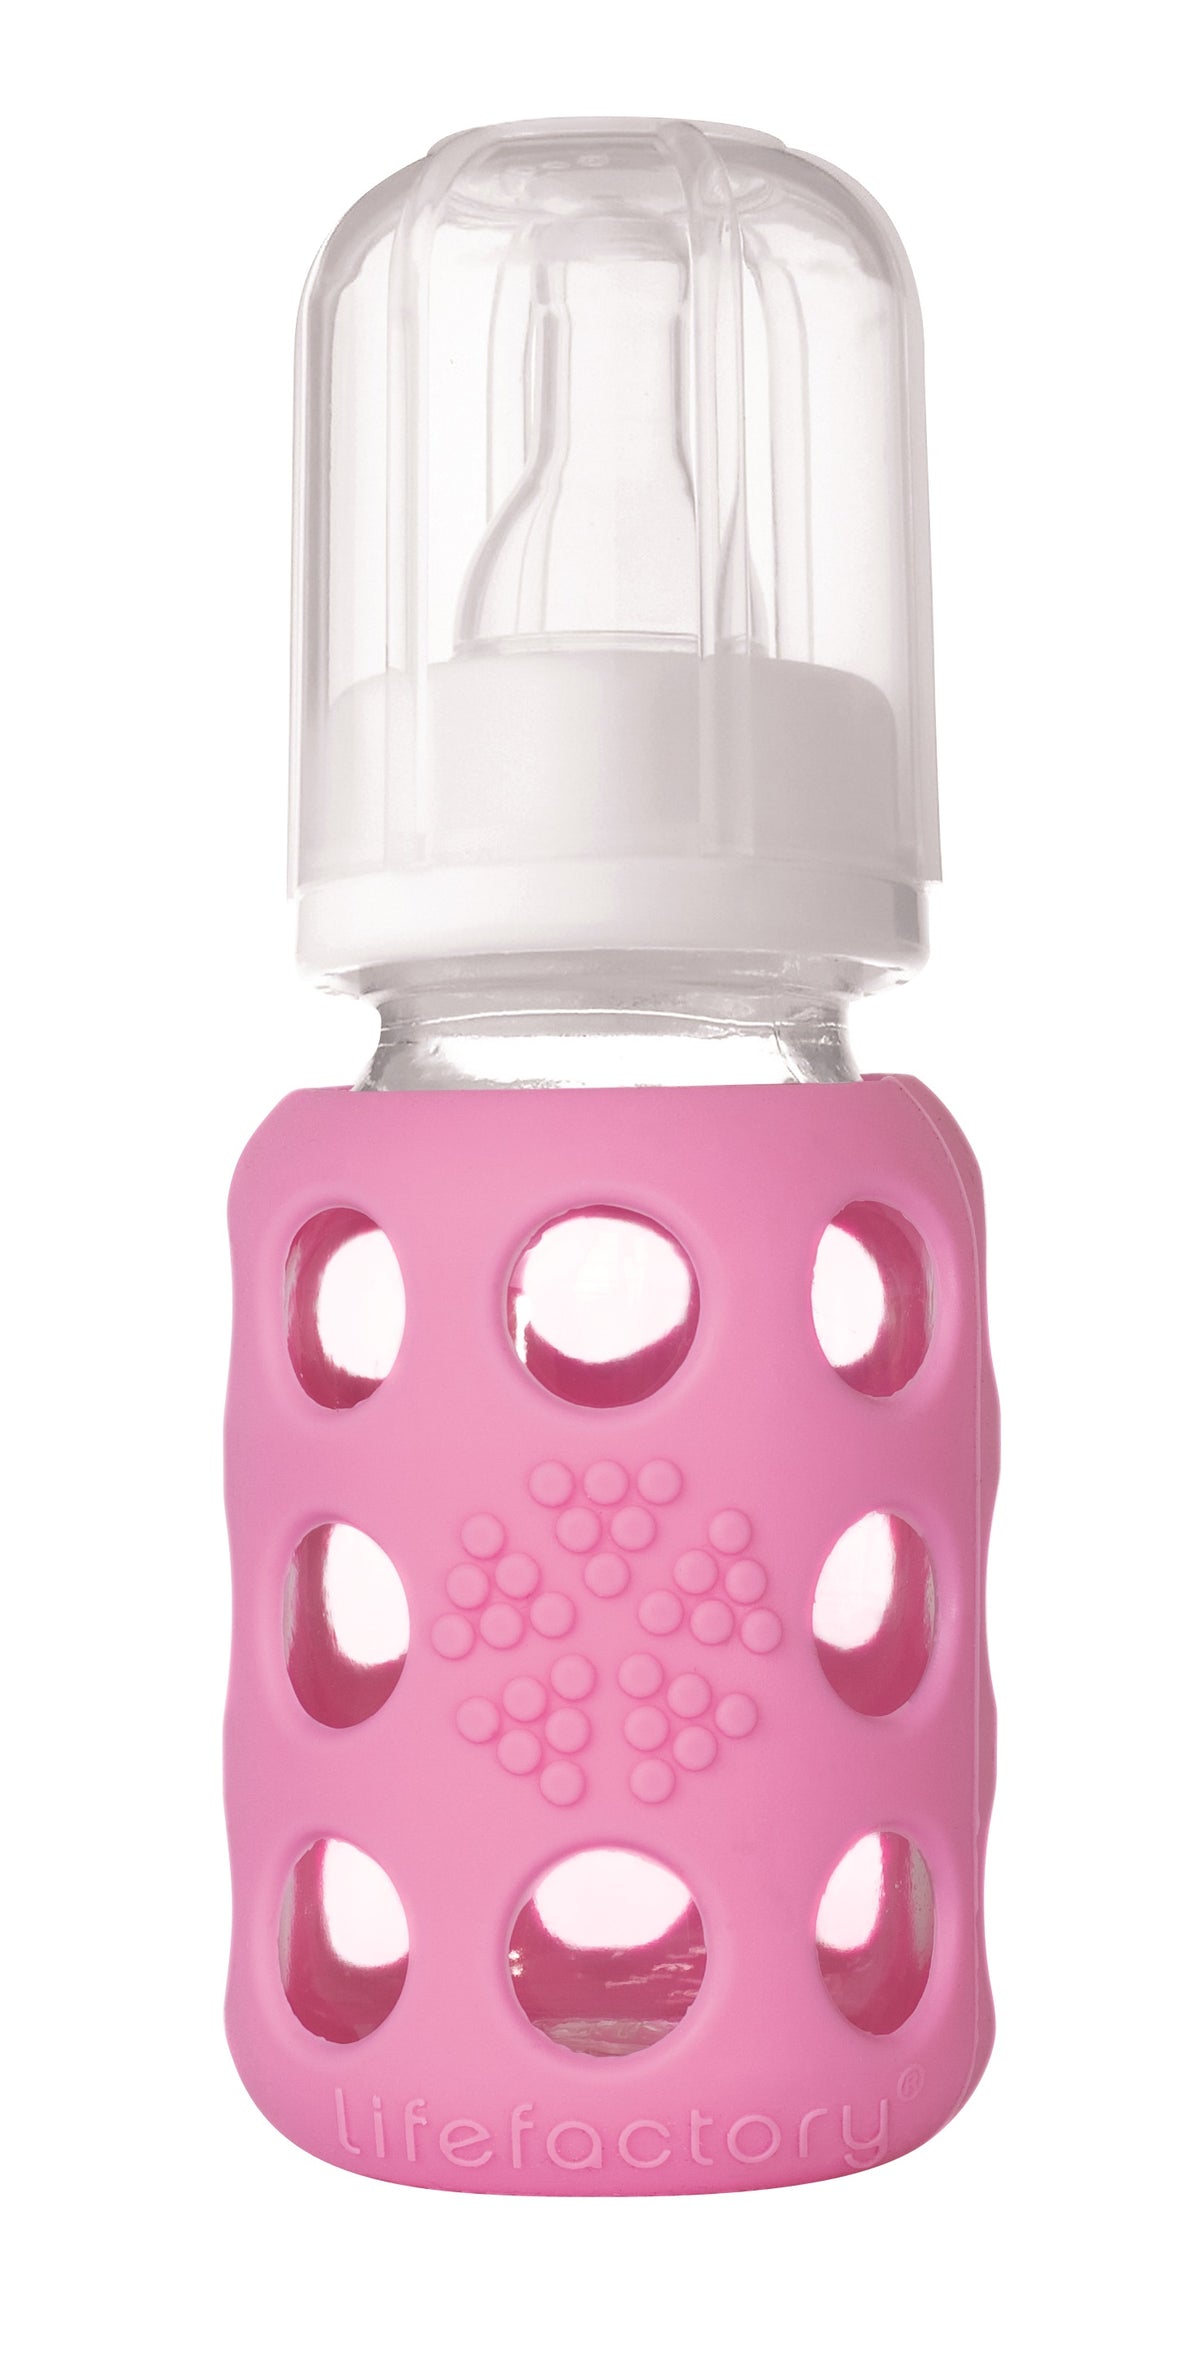 Lifefactory 110003 Baby Glass Water Bottle, Pink, 4 Oz